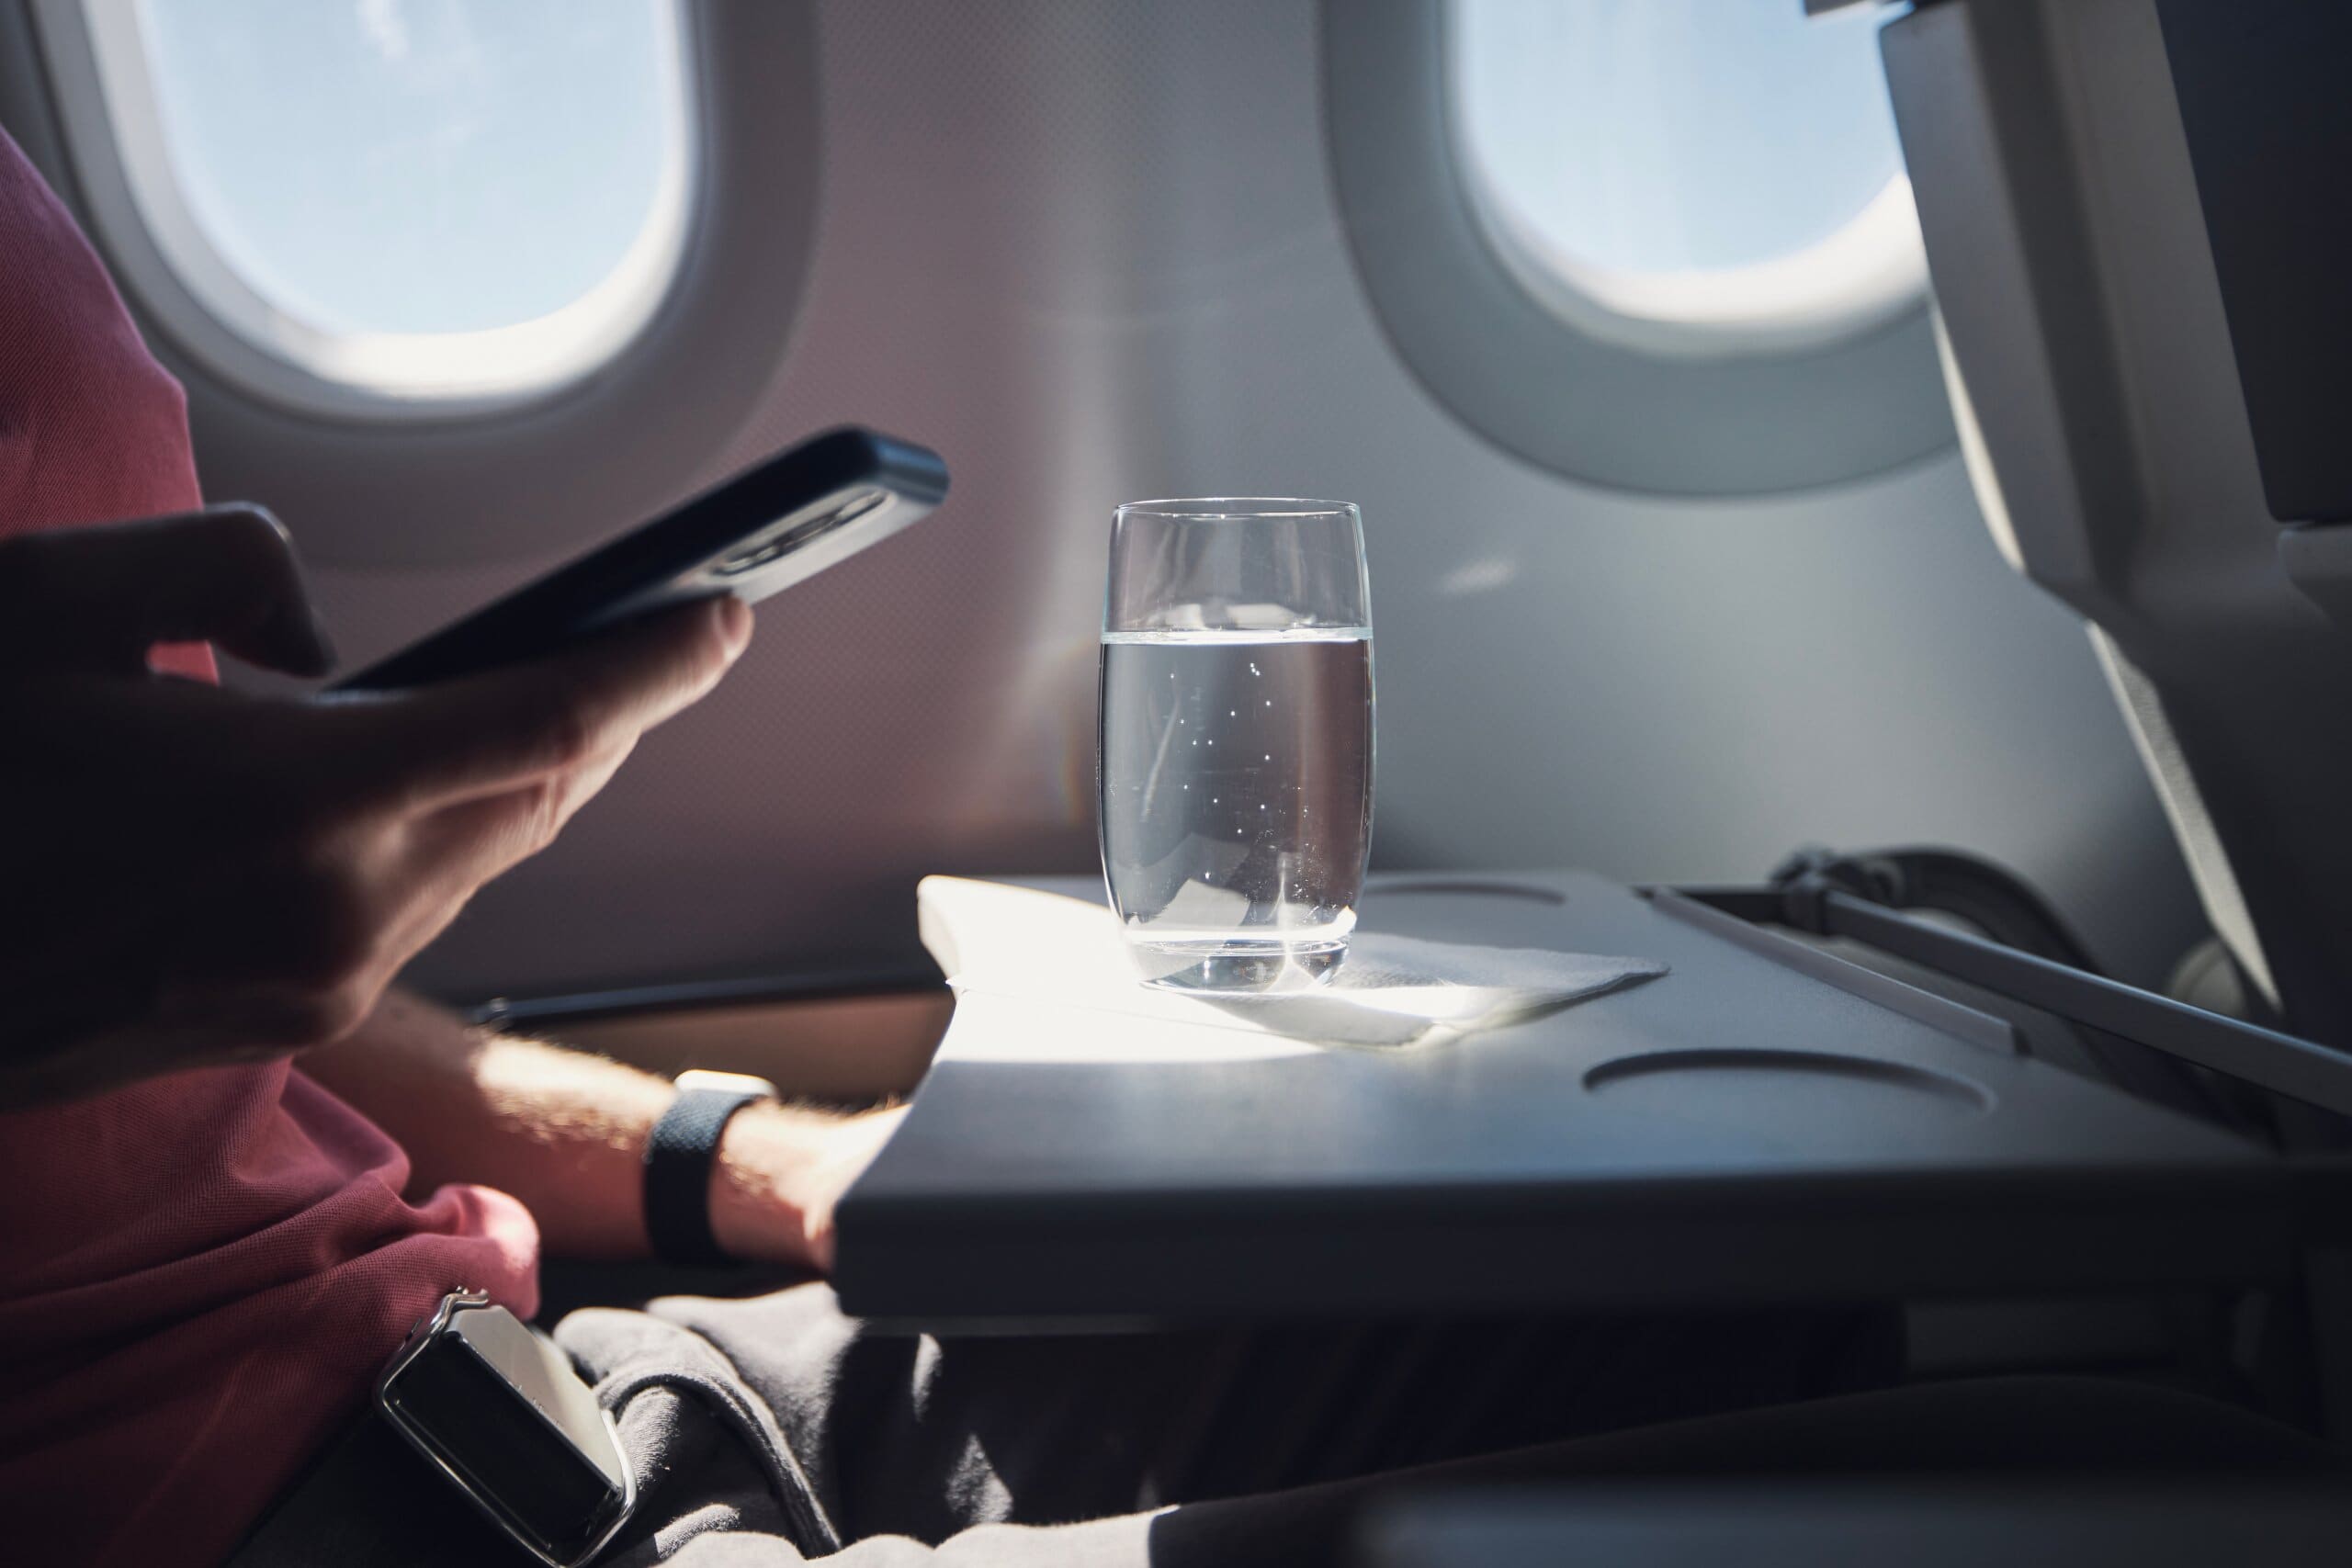 Glass of water on the tray table of a passenger's seat on a plane.